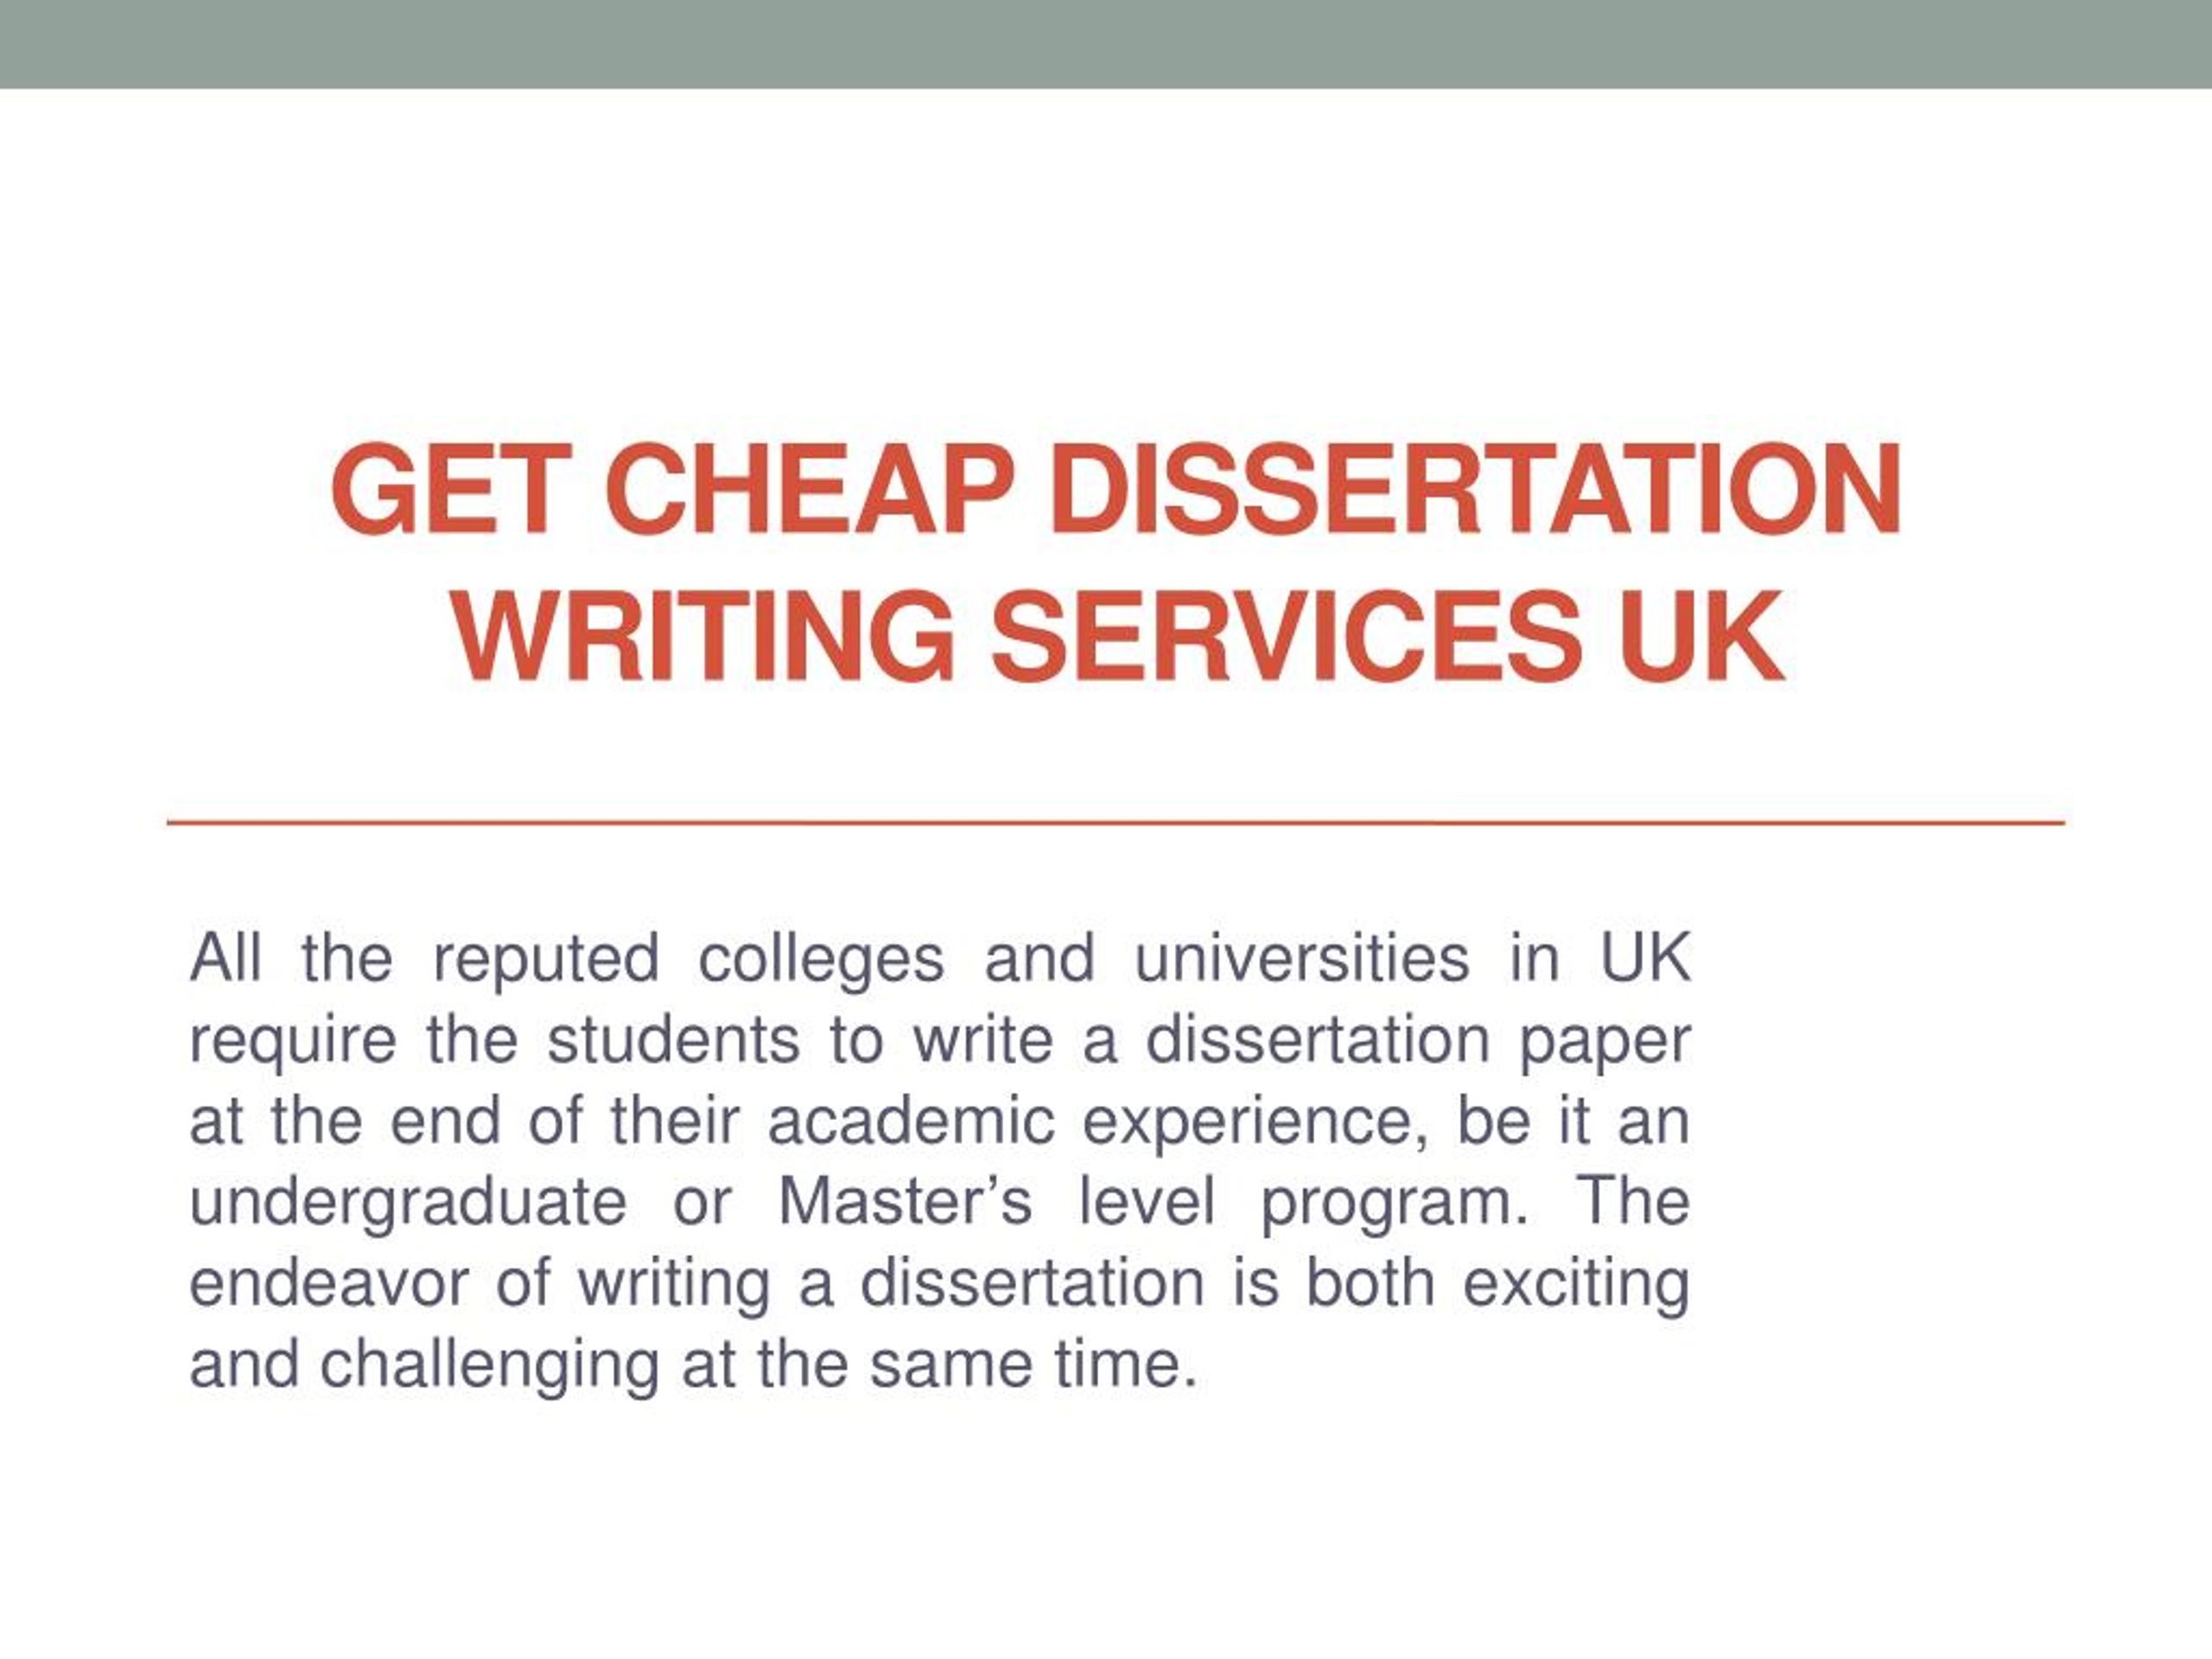 affordable dissertation writing services